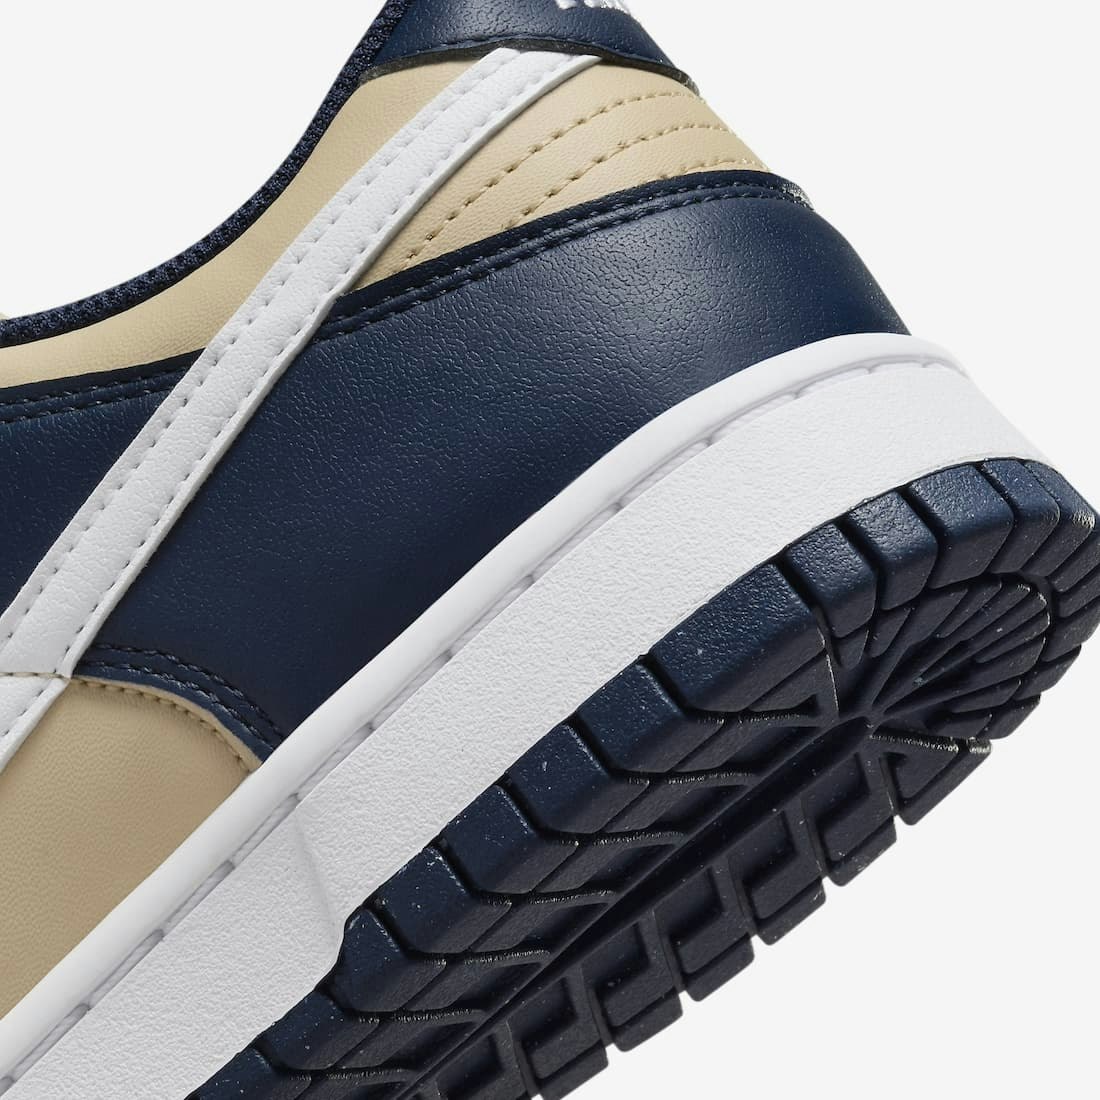 Nike Dunk Low Next Nature "Midnight Navy"